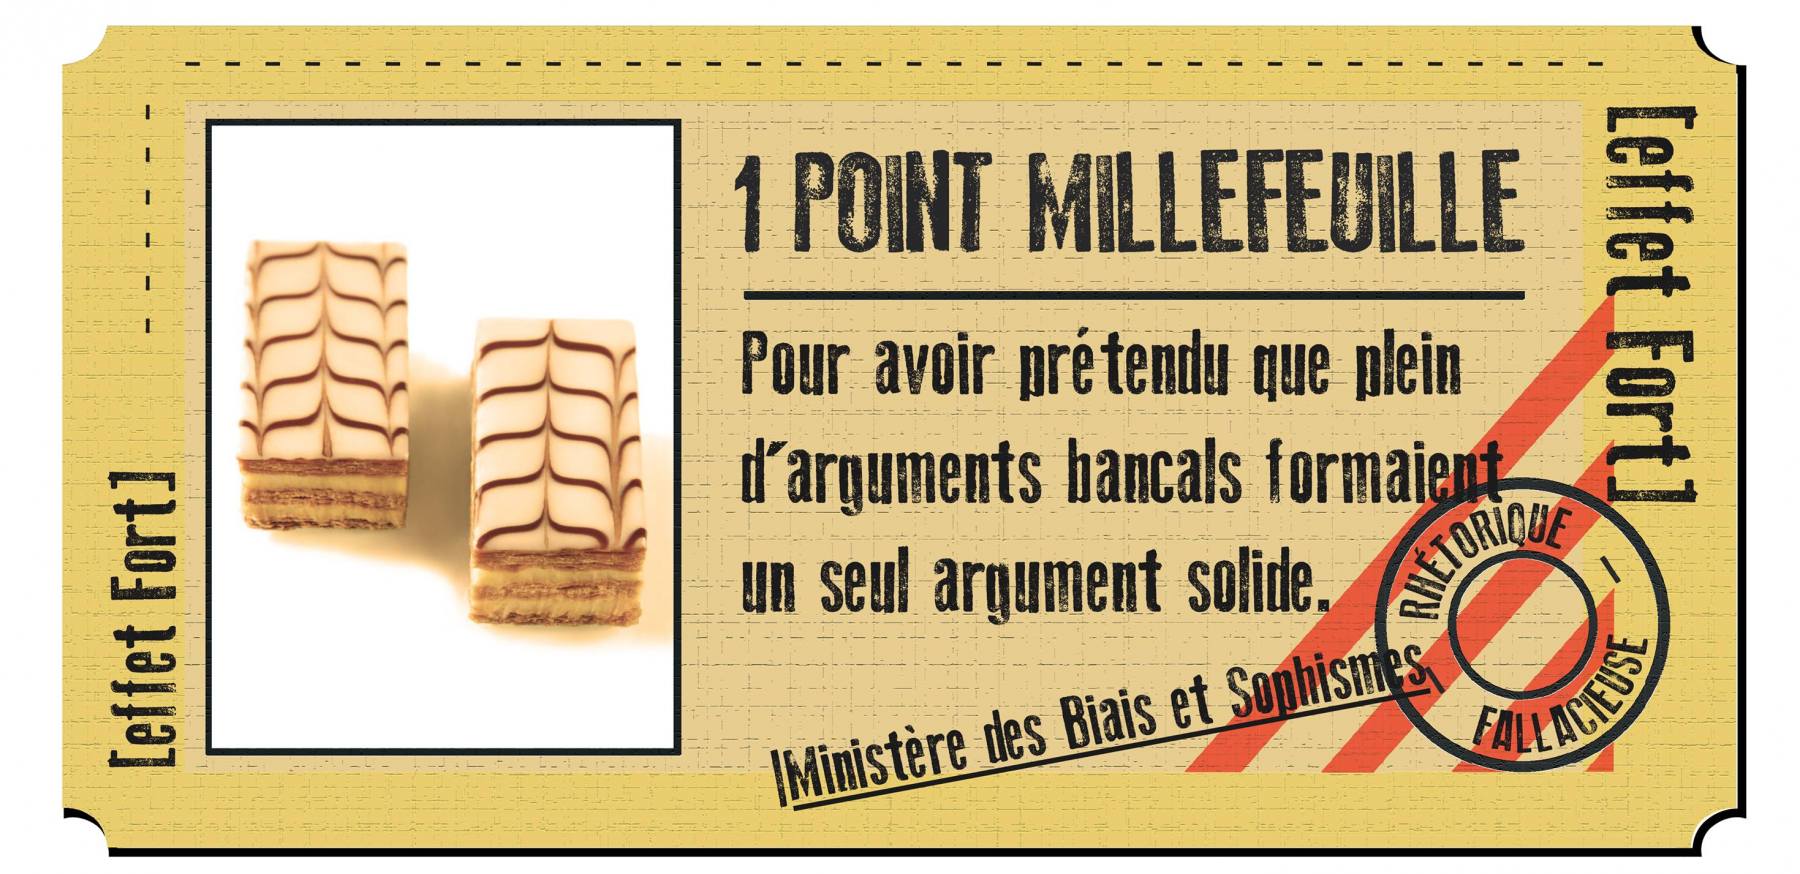 ![...](http://img.ikilote.net/img/1_point_millefeuille.jpg =x100)